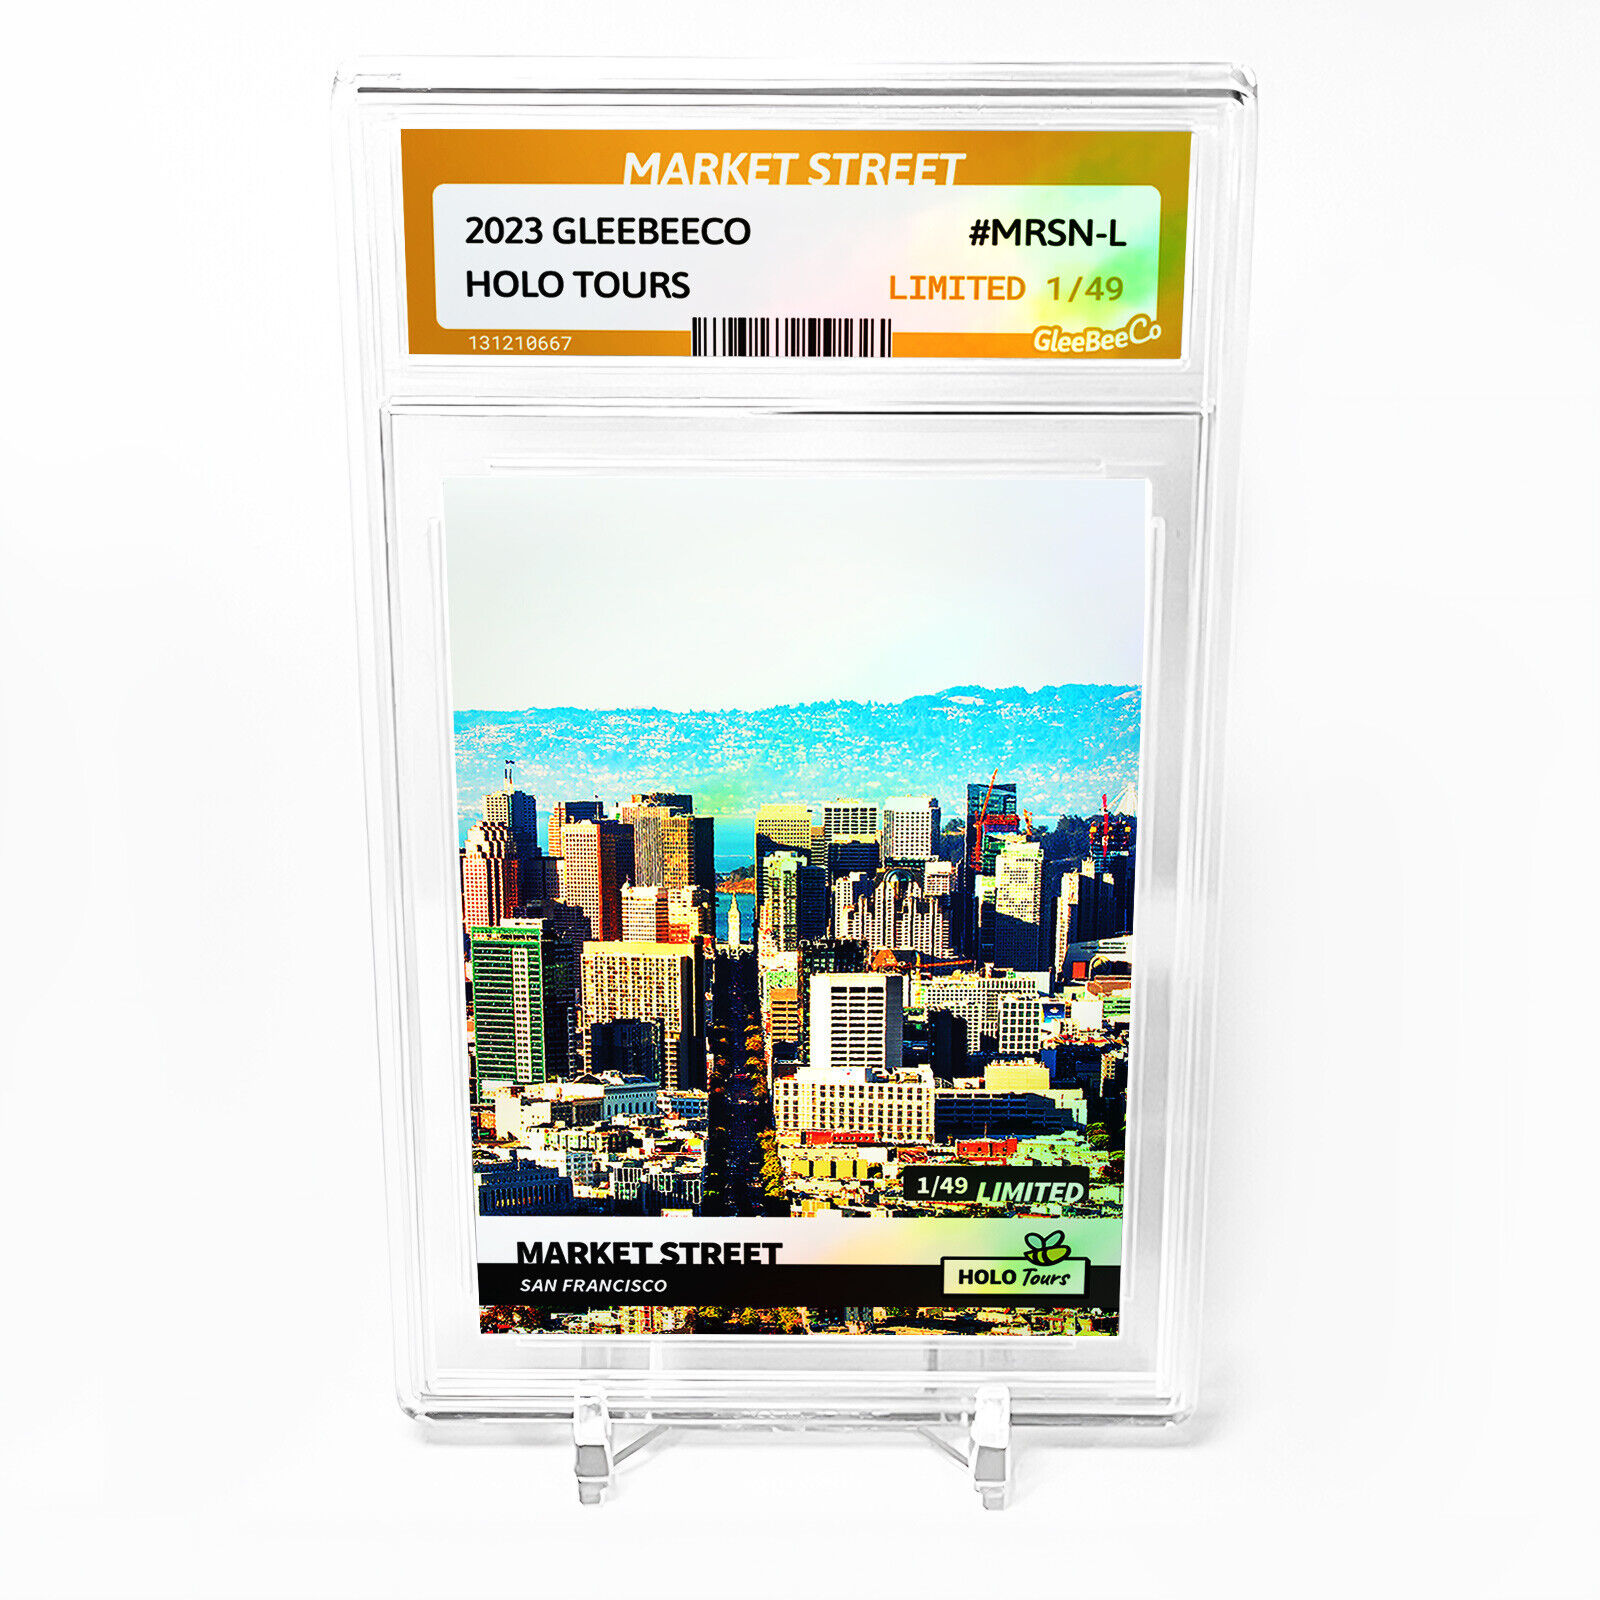 MARKET STREET Card 2023 GleeBeeCo Holo Tours #MRSN-L Limited to Only /49